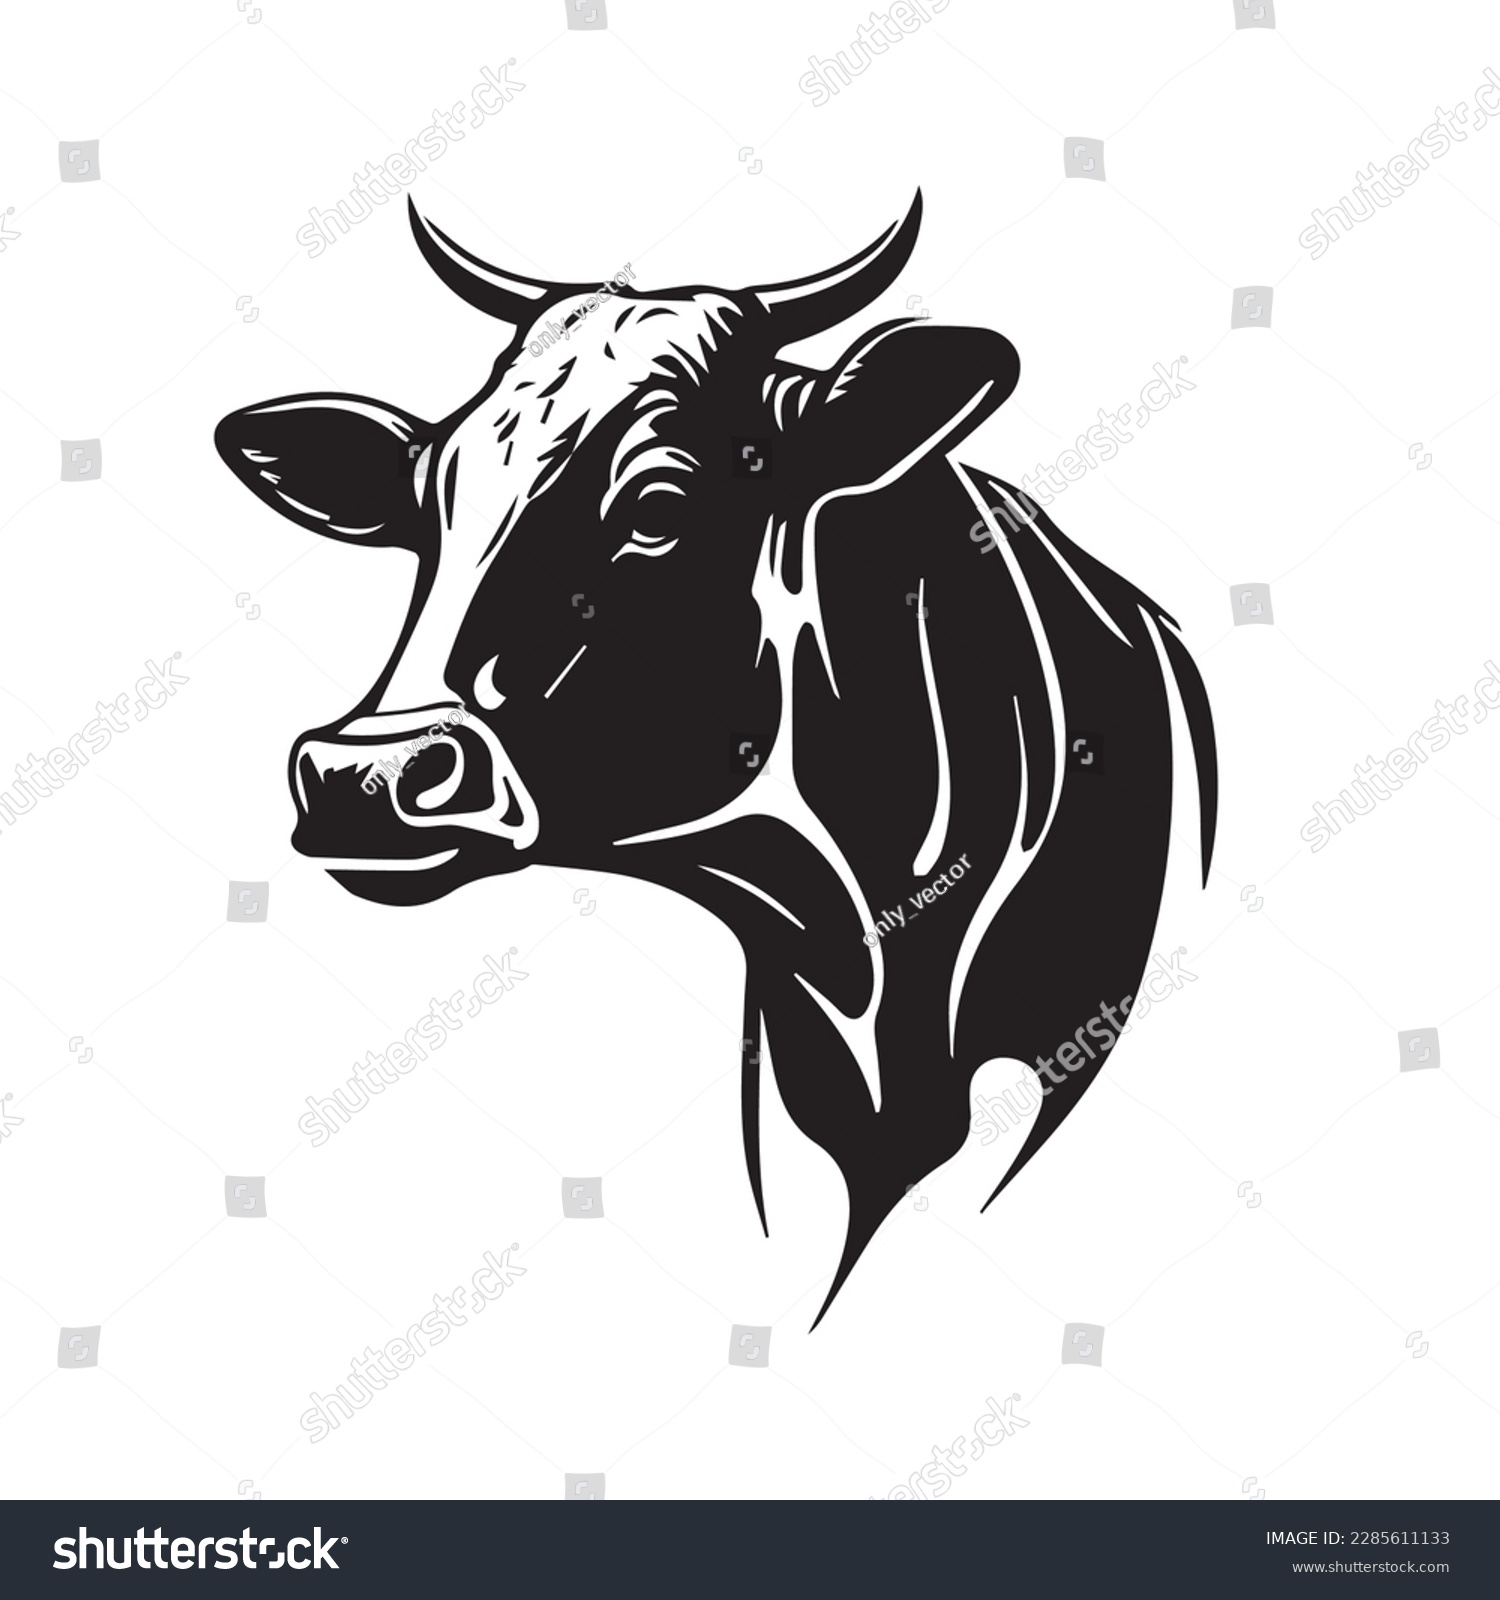 SVG of Cow vector image on a white background. Vector illustration silhouette svg. svg